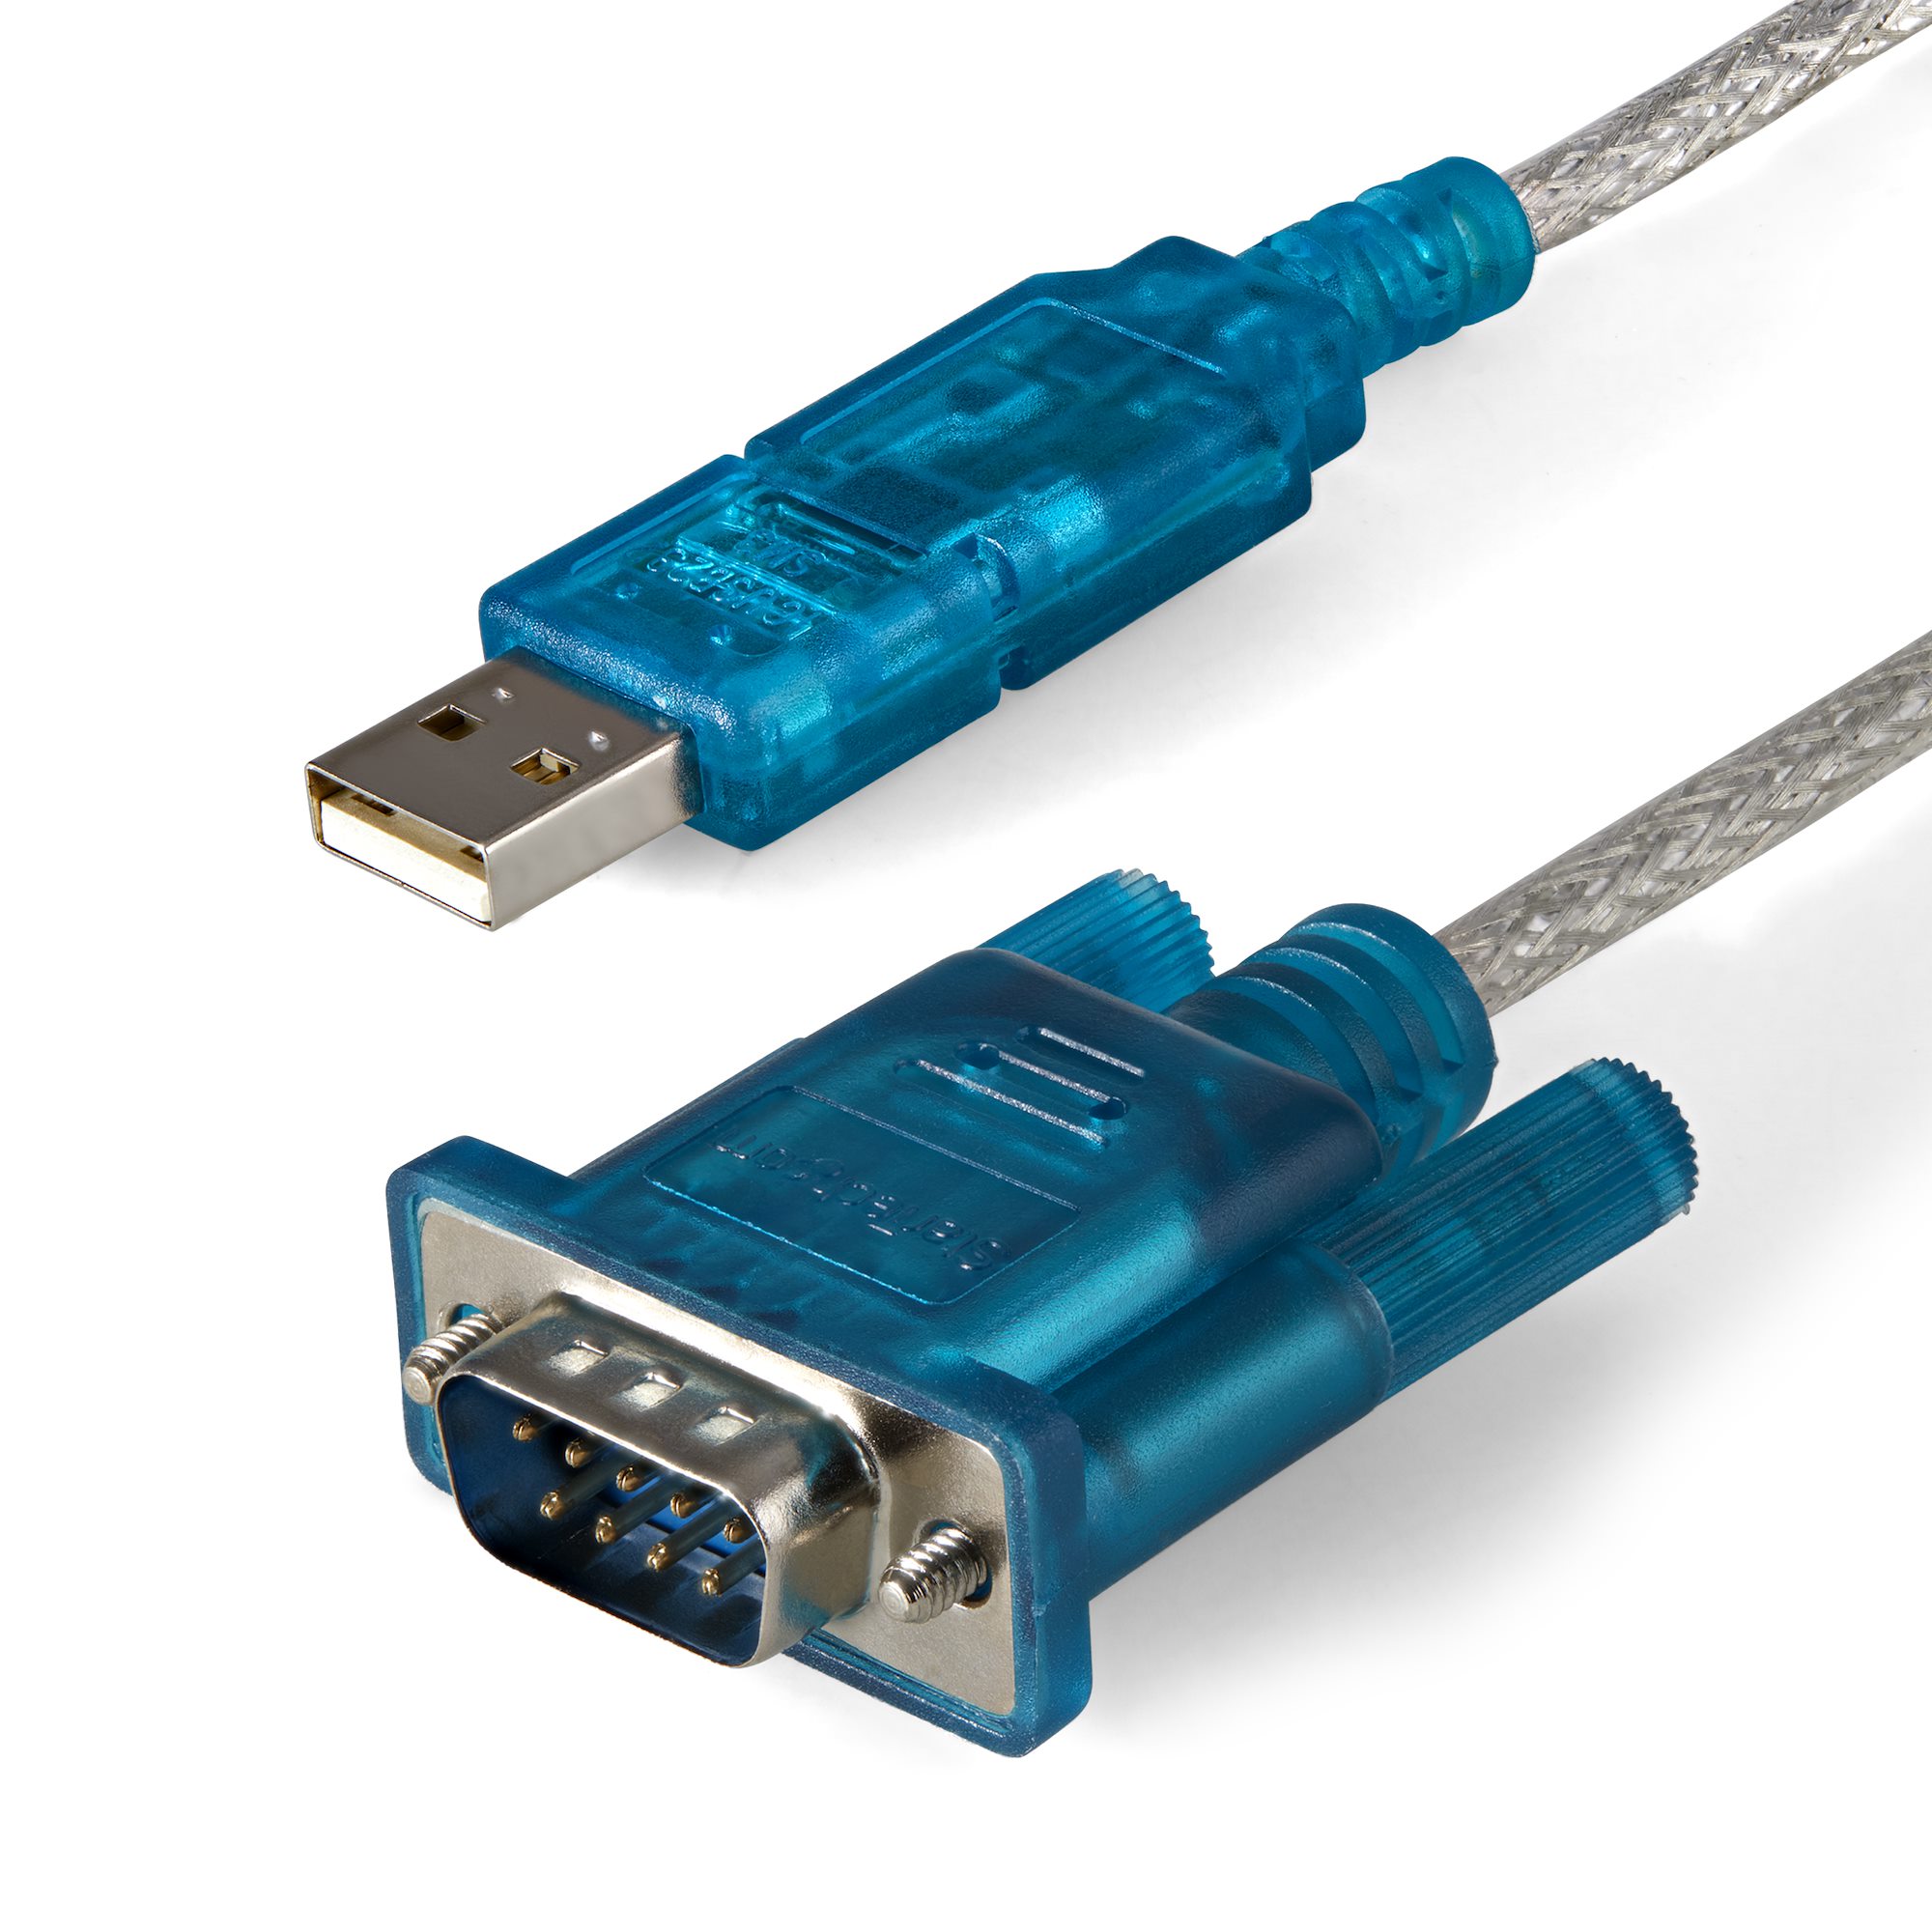 【ICUSB232SM3】USB TO SERIAL ADAPTER CABLE